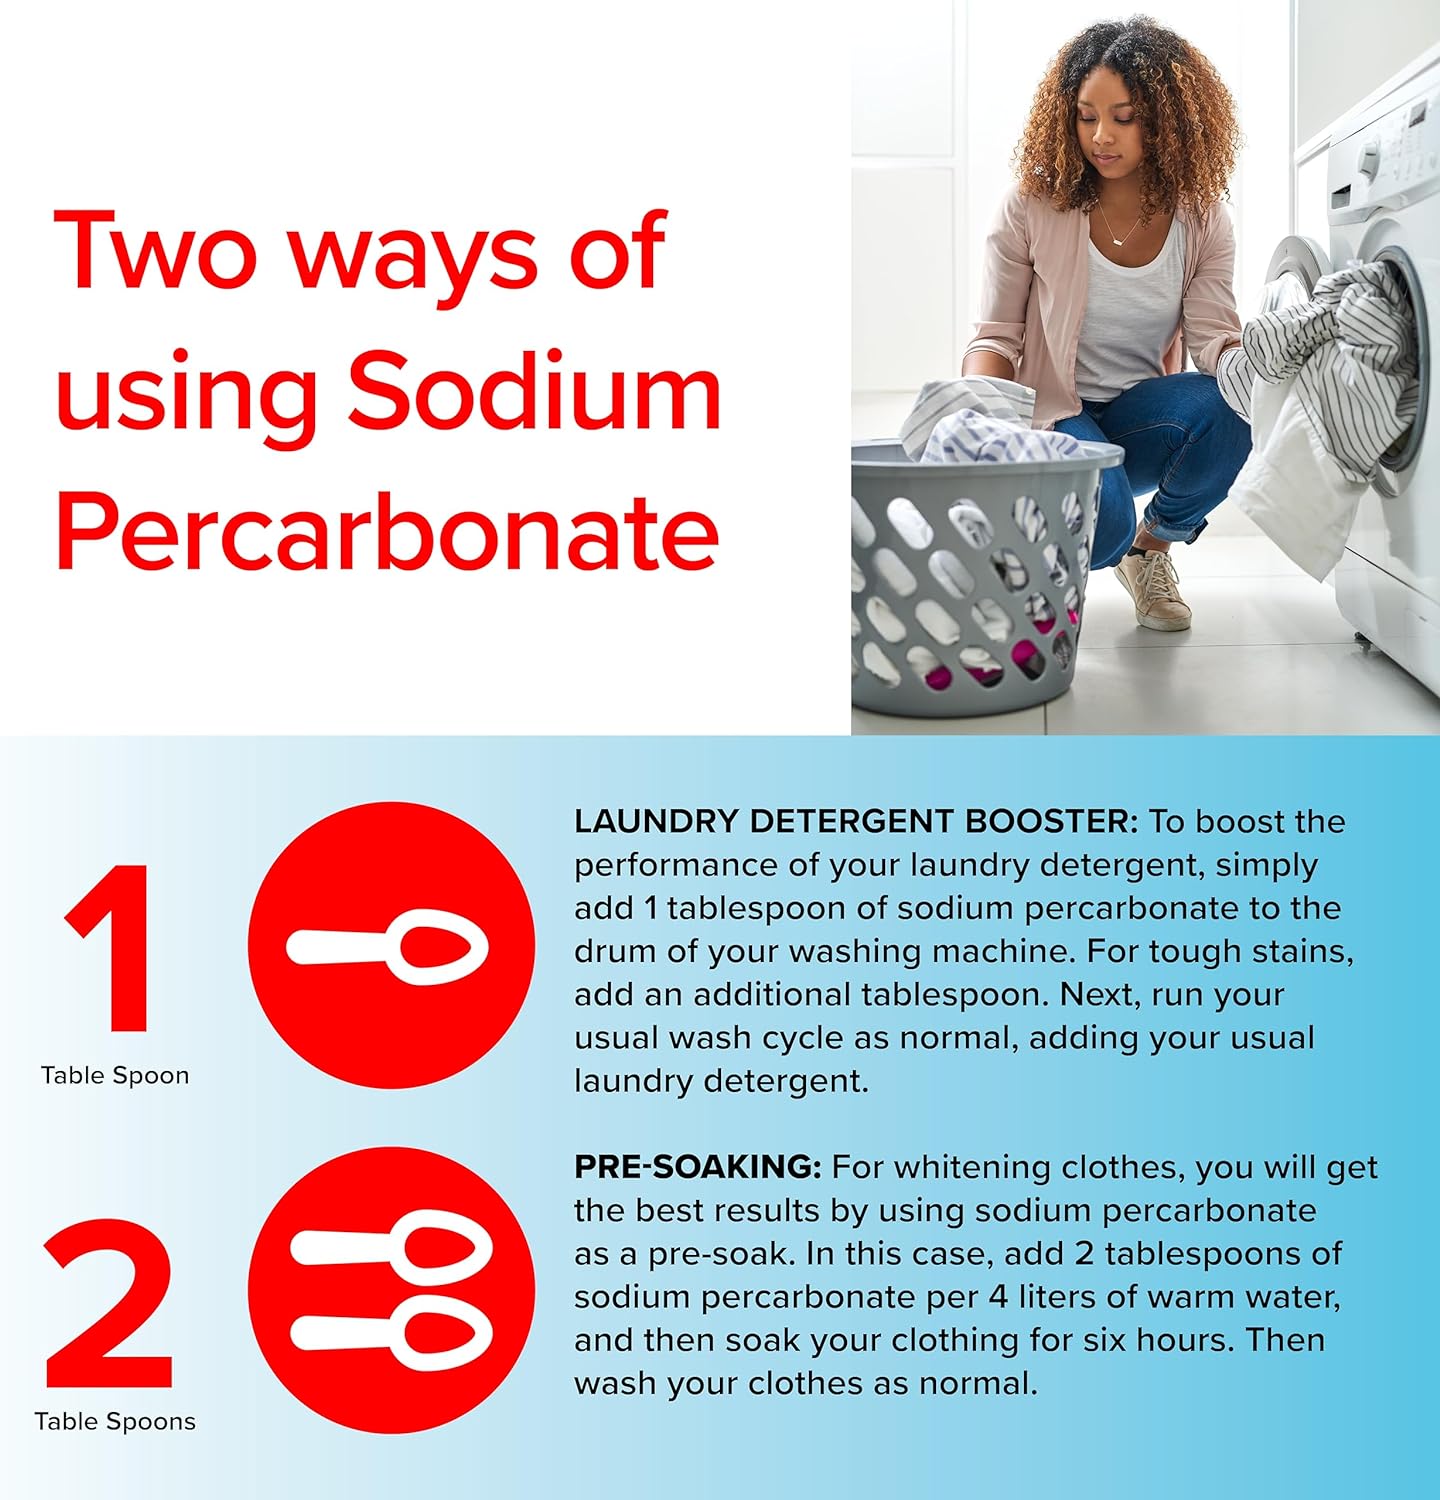 SupplyMasters Sodium Percarbonate Powder 5 lbs Pack - Oxygen Source & Bleach Alternative - Clothes Brightener, Laundry Detergent & Stain Remover : Health & Household